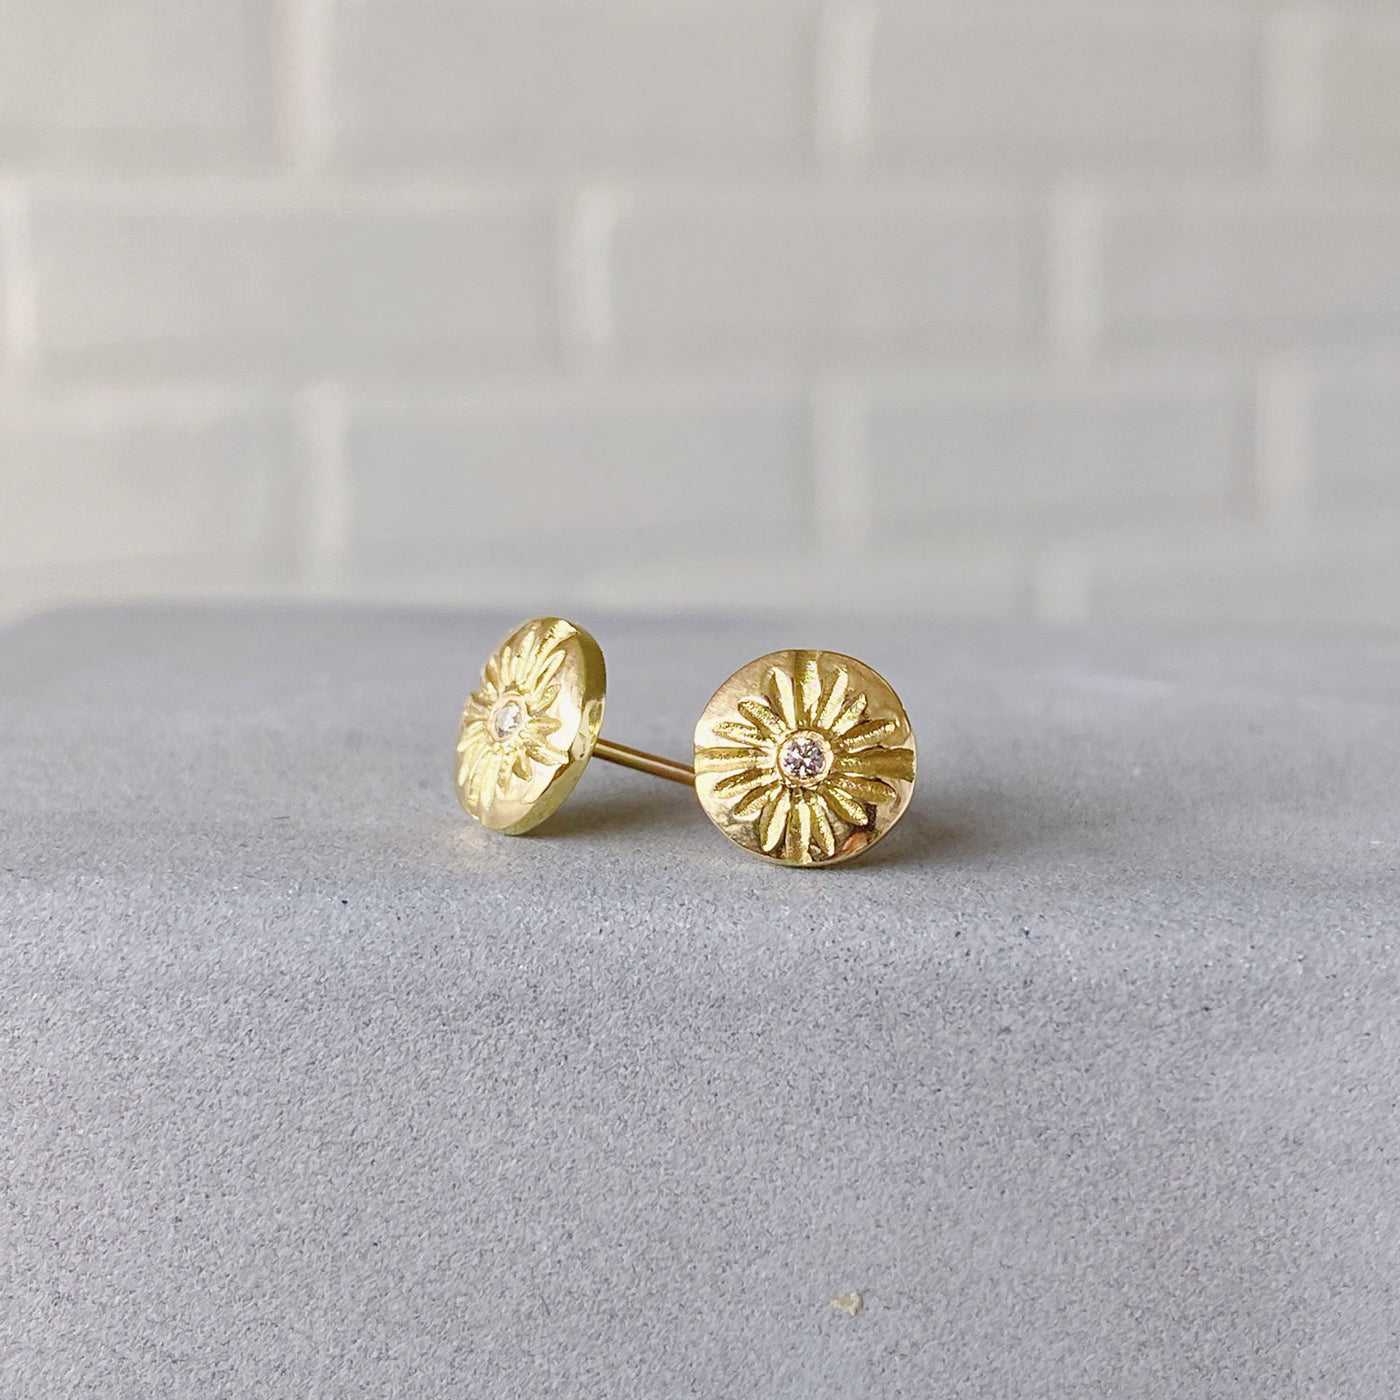 Small round carved sunburst stud earrings with diamond centers in gold in natural light side view